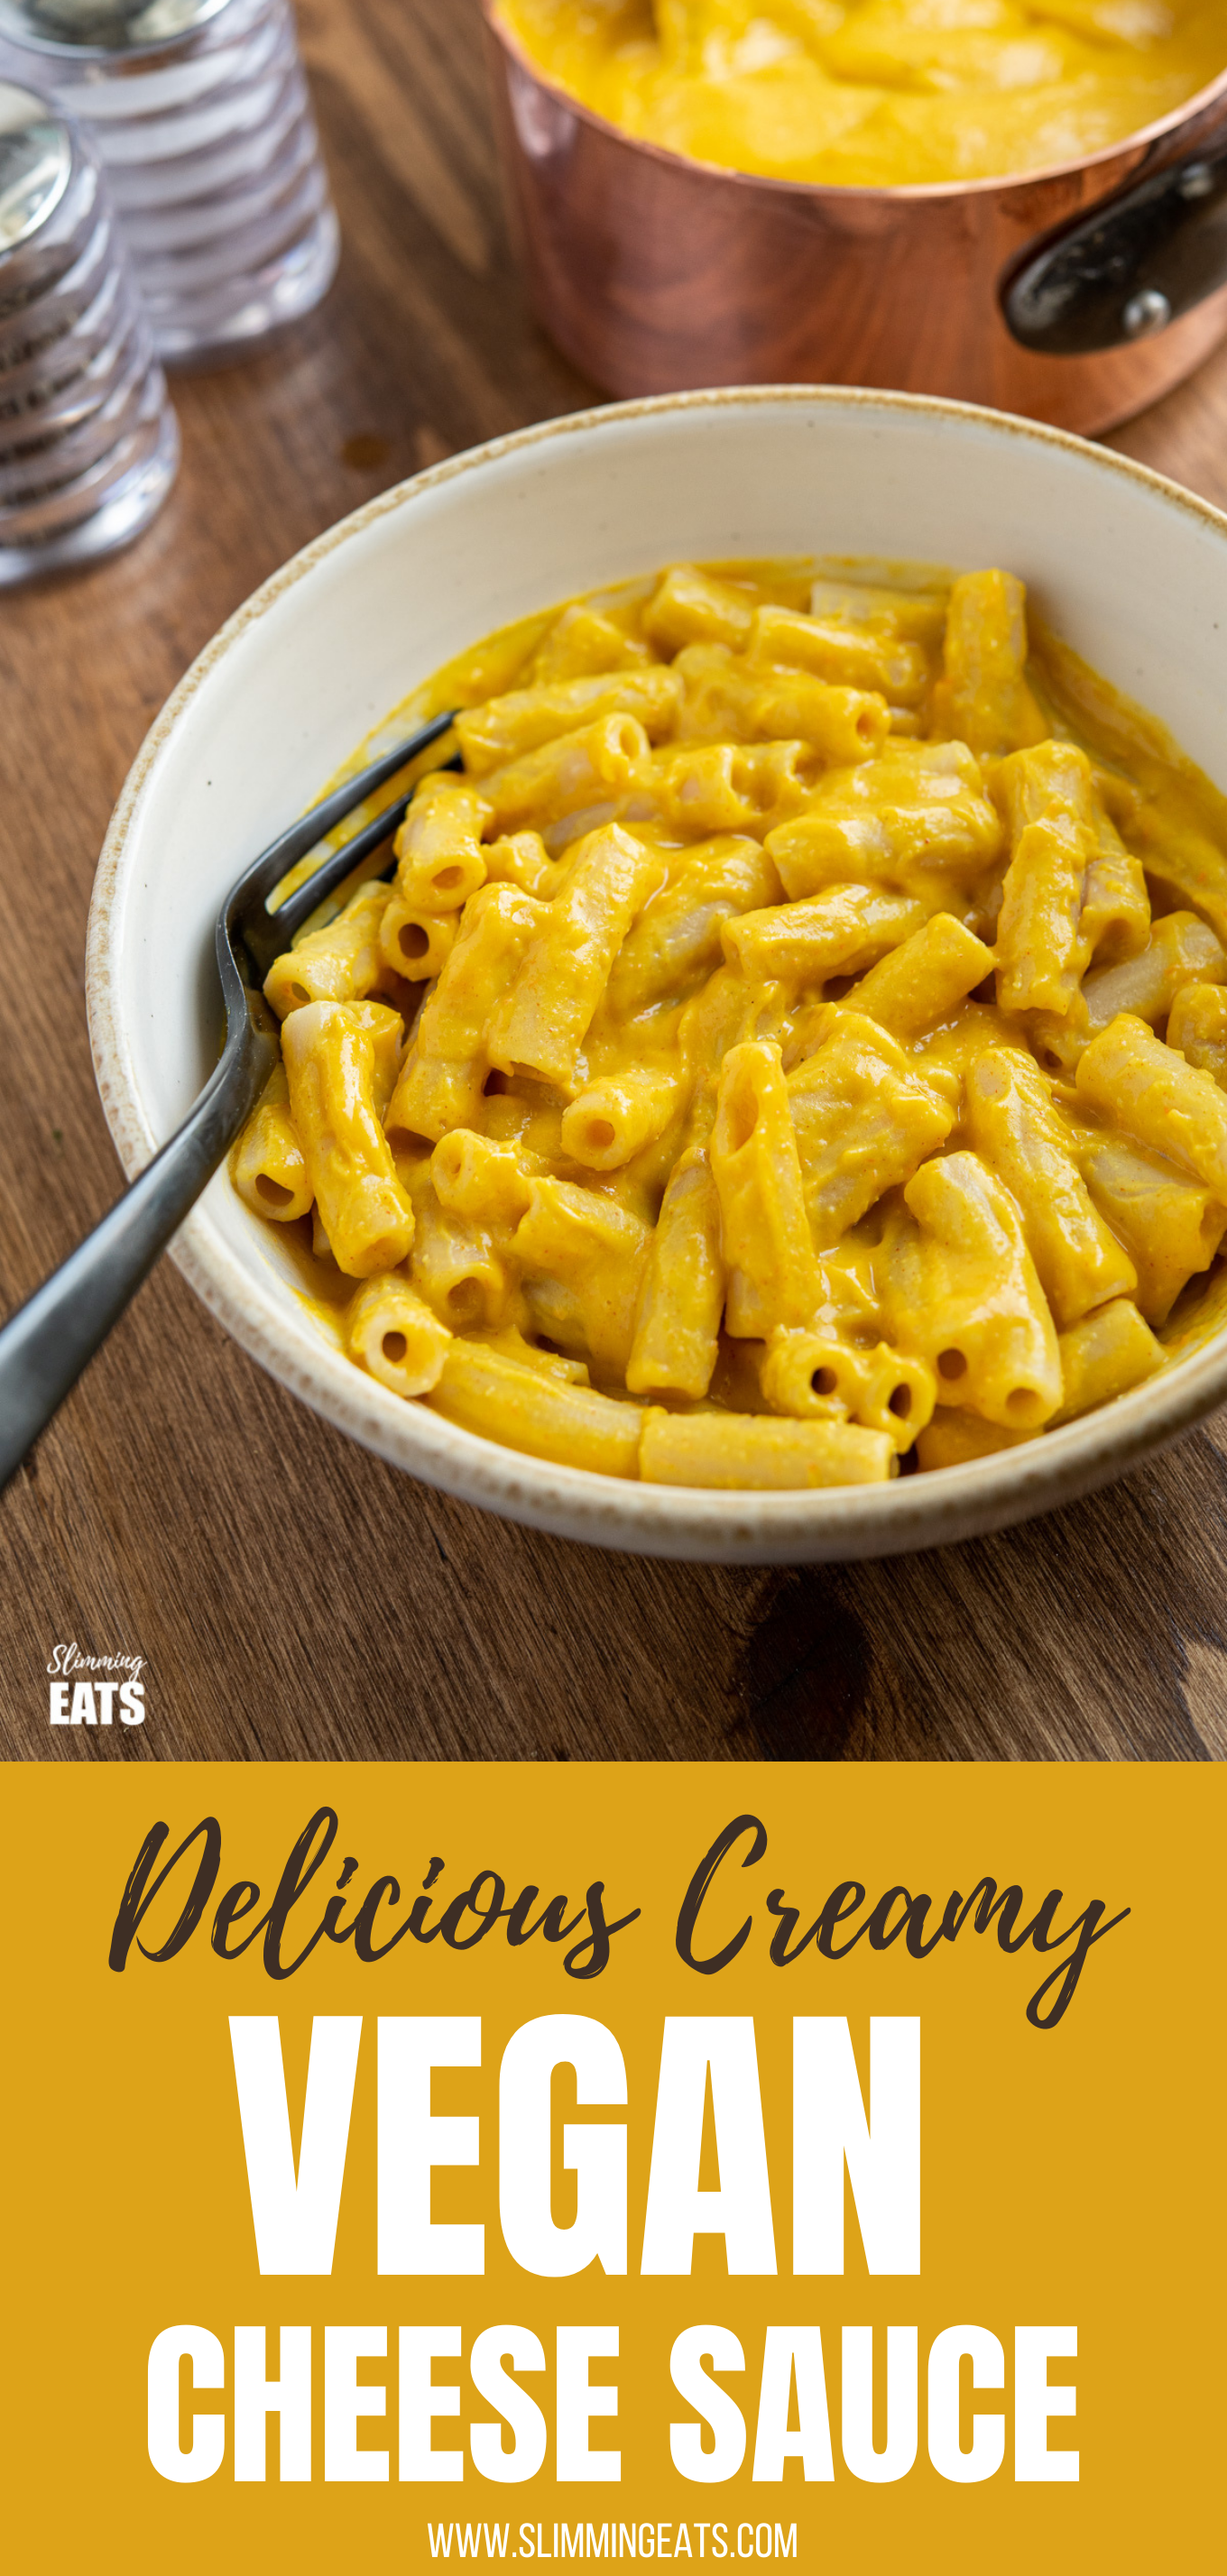 Delicious Creamy Vegan Cheese Sauce in bowl over pasta with black fork